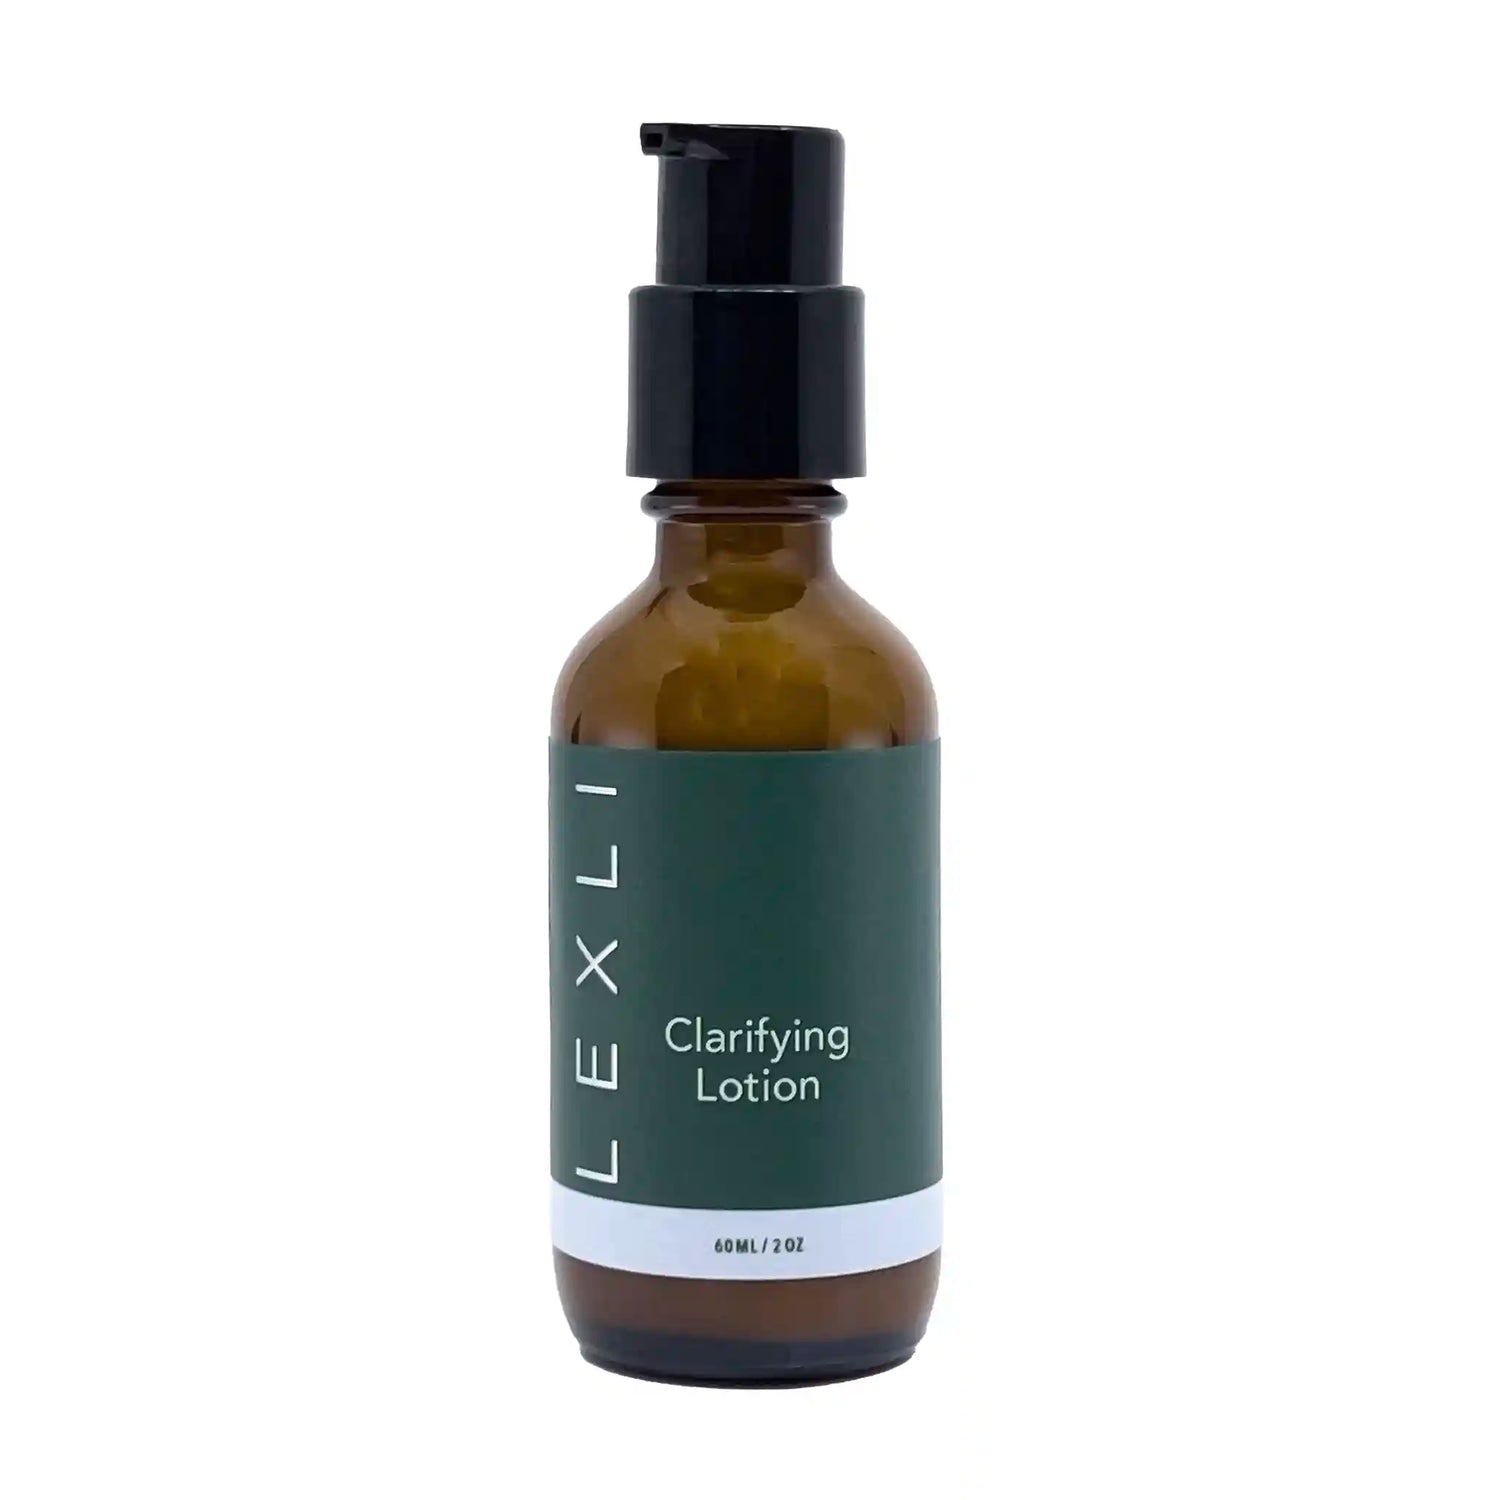 2 oz bottle with green label, Clarifying Lotion 